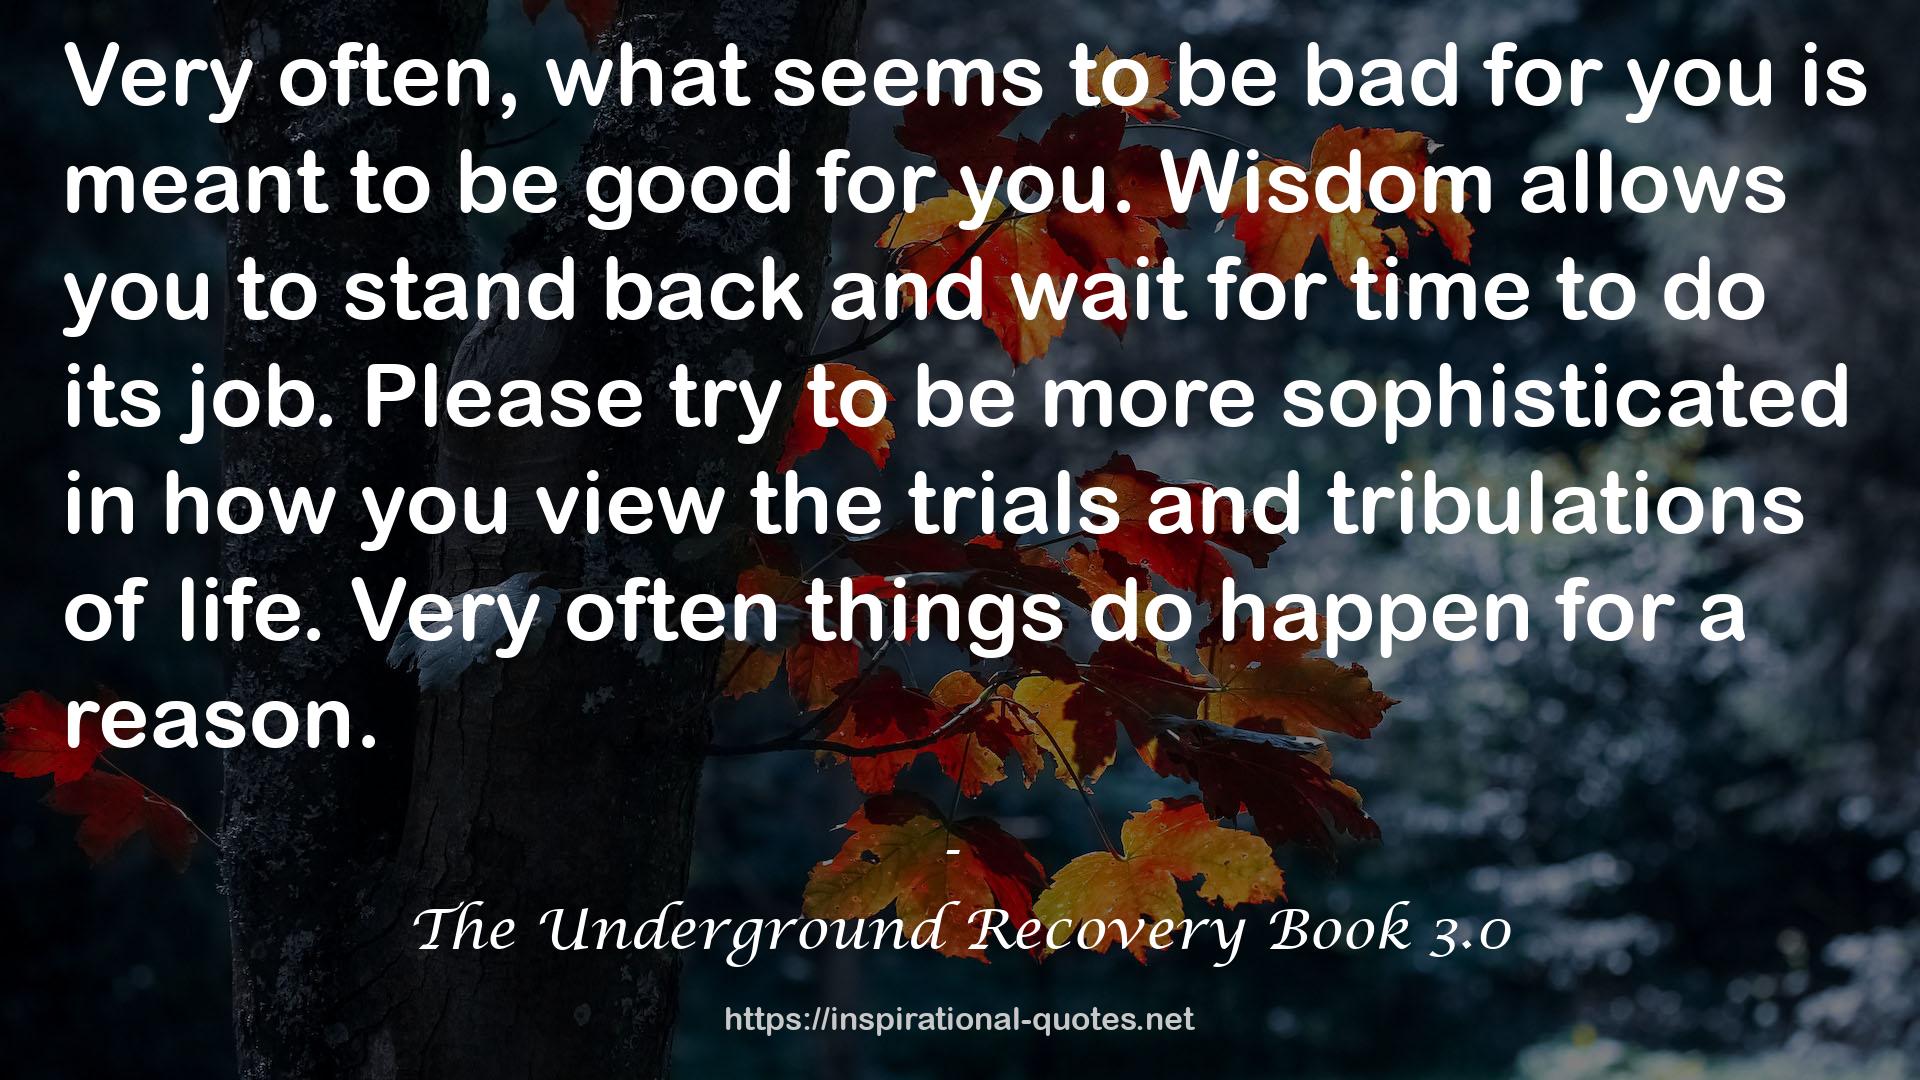 The Underground Recovery Book 3.0 QUOTES